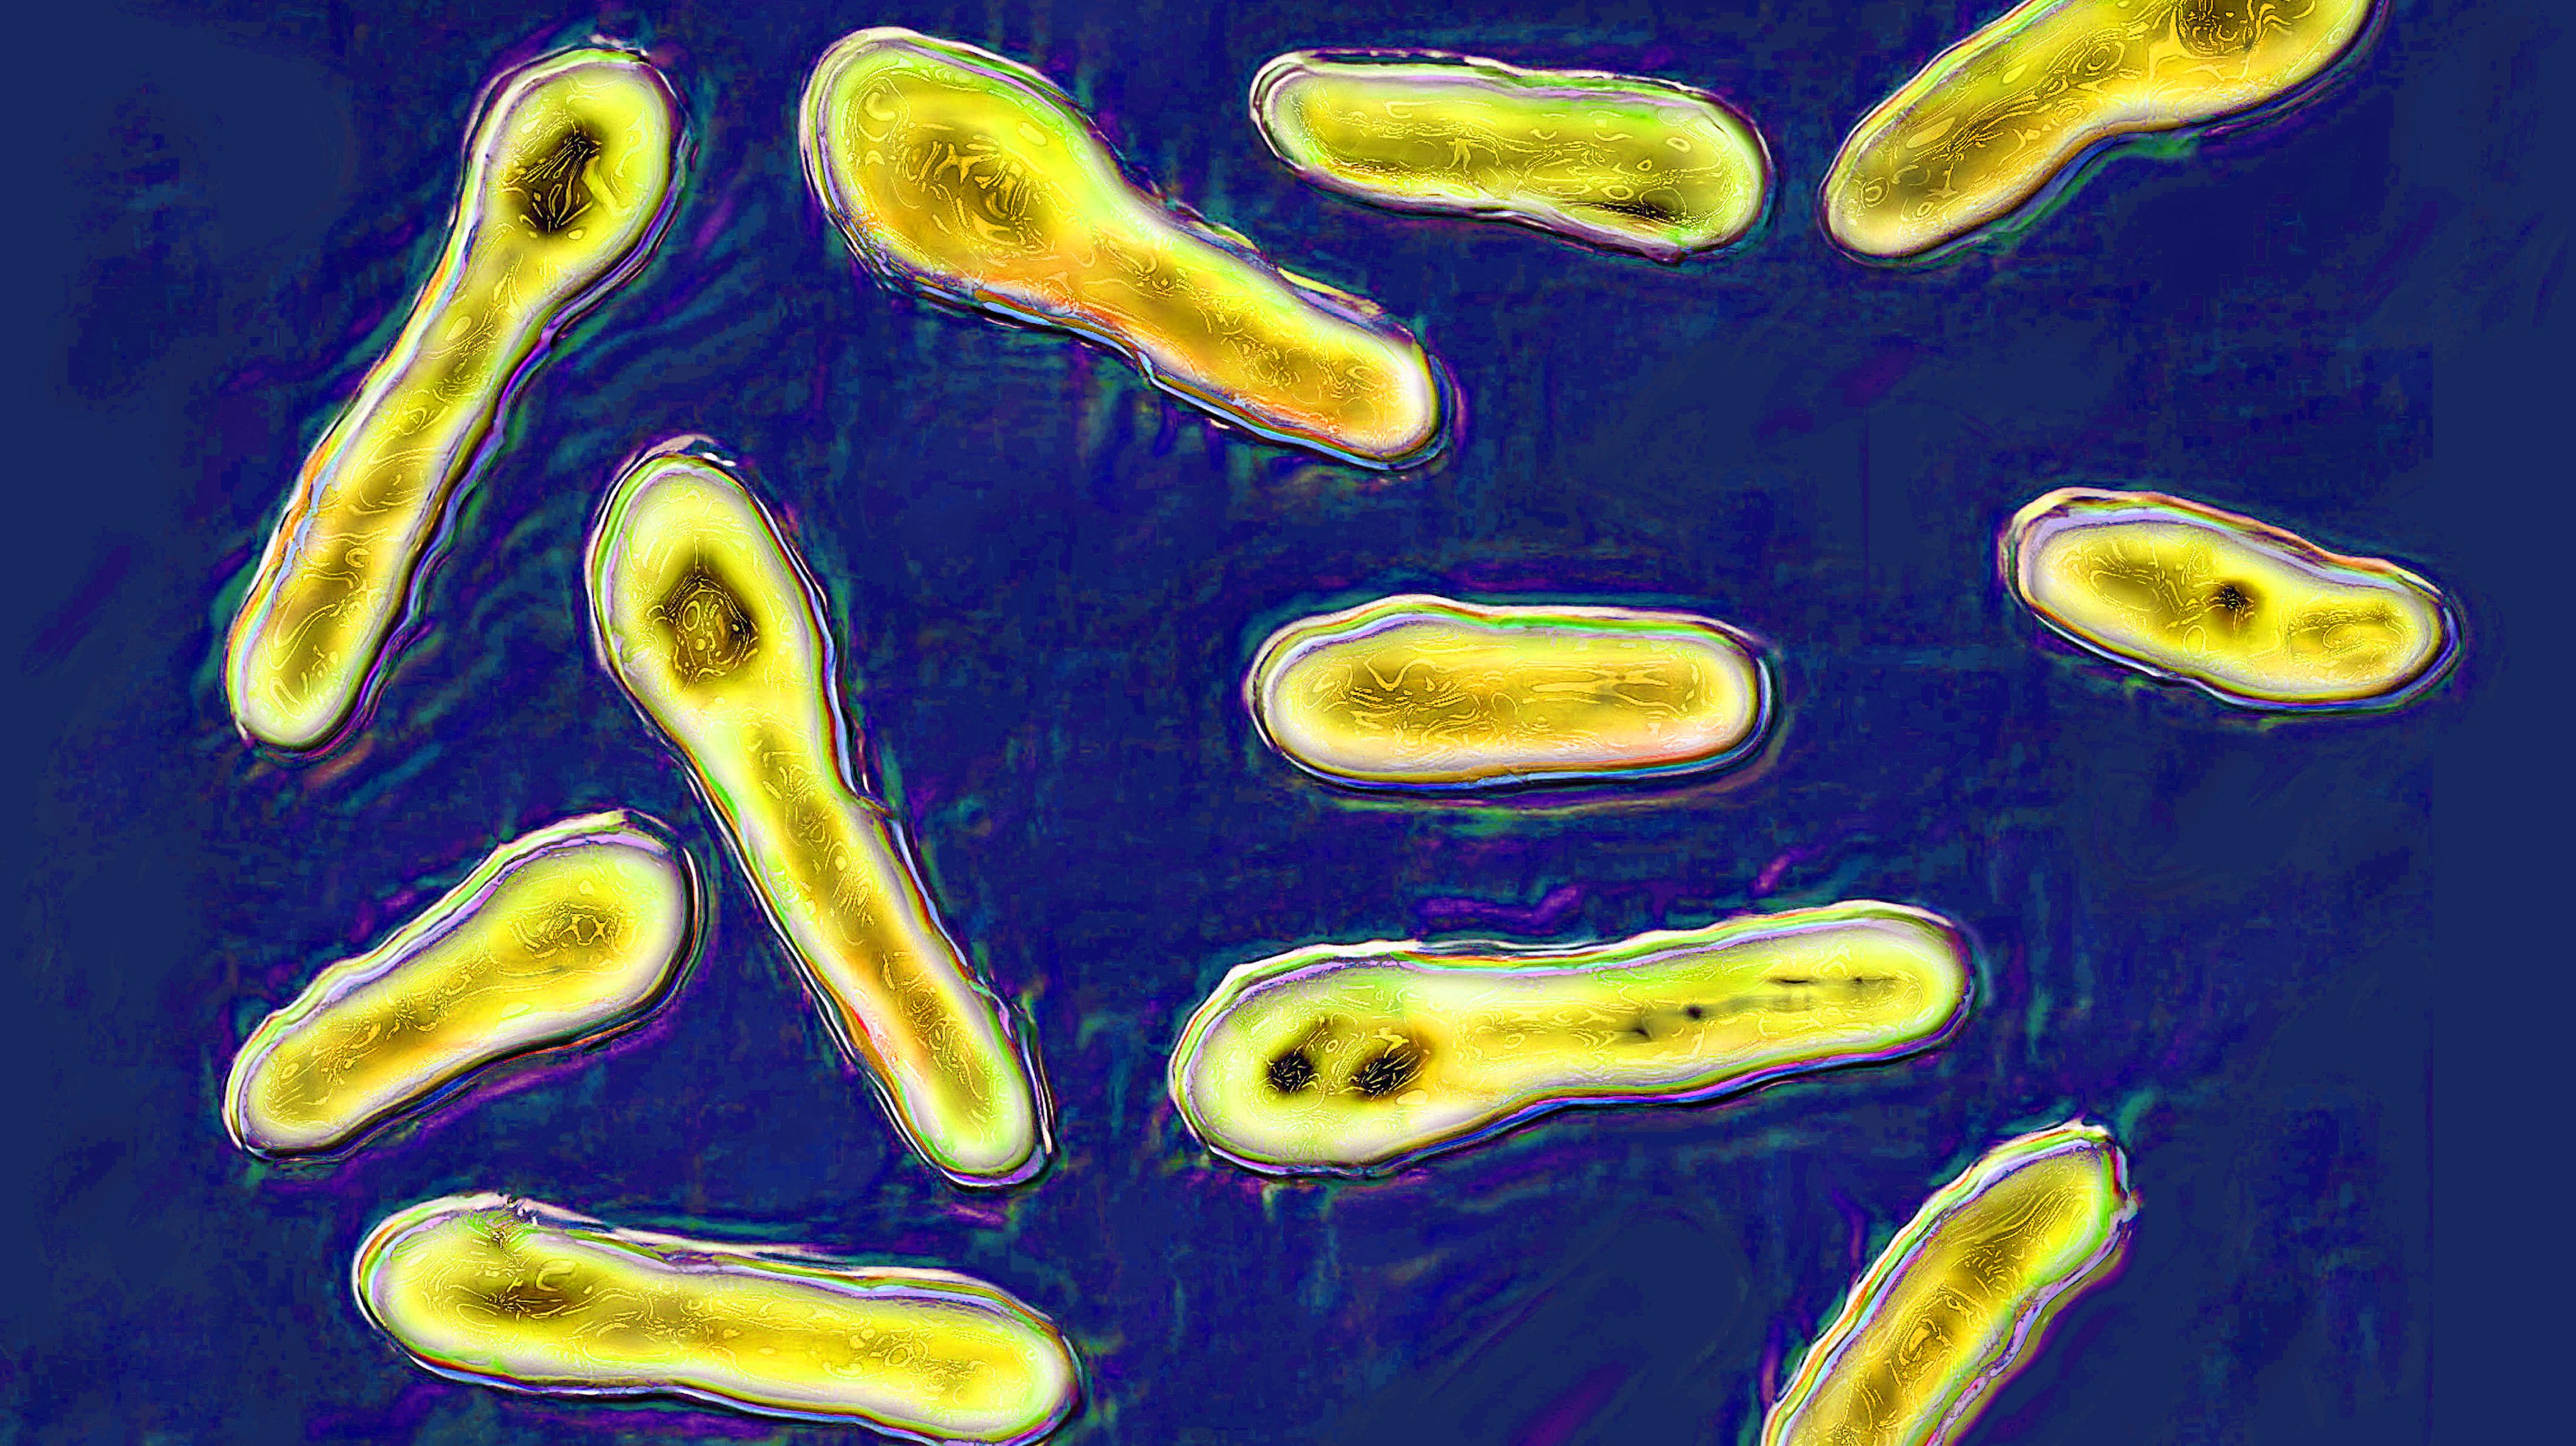 Clostridium botulinum or botulinum bacillus is a bacterium that secretes botox, a toxin that inhibits the neurons responsible for muscle contraction. By localized injection, the toxin reduces wrinkles by paralyzing the muscles causing wrinkles. Colorization and HDRI treatments on X 1000 optical microscopy. (Photo by: CAVALLINI JAMES/BSIP/Universal Images Group via Getty Images)